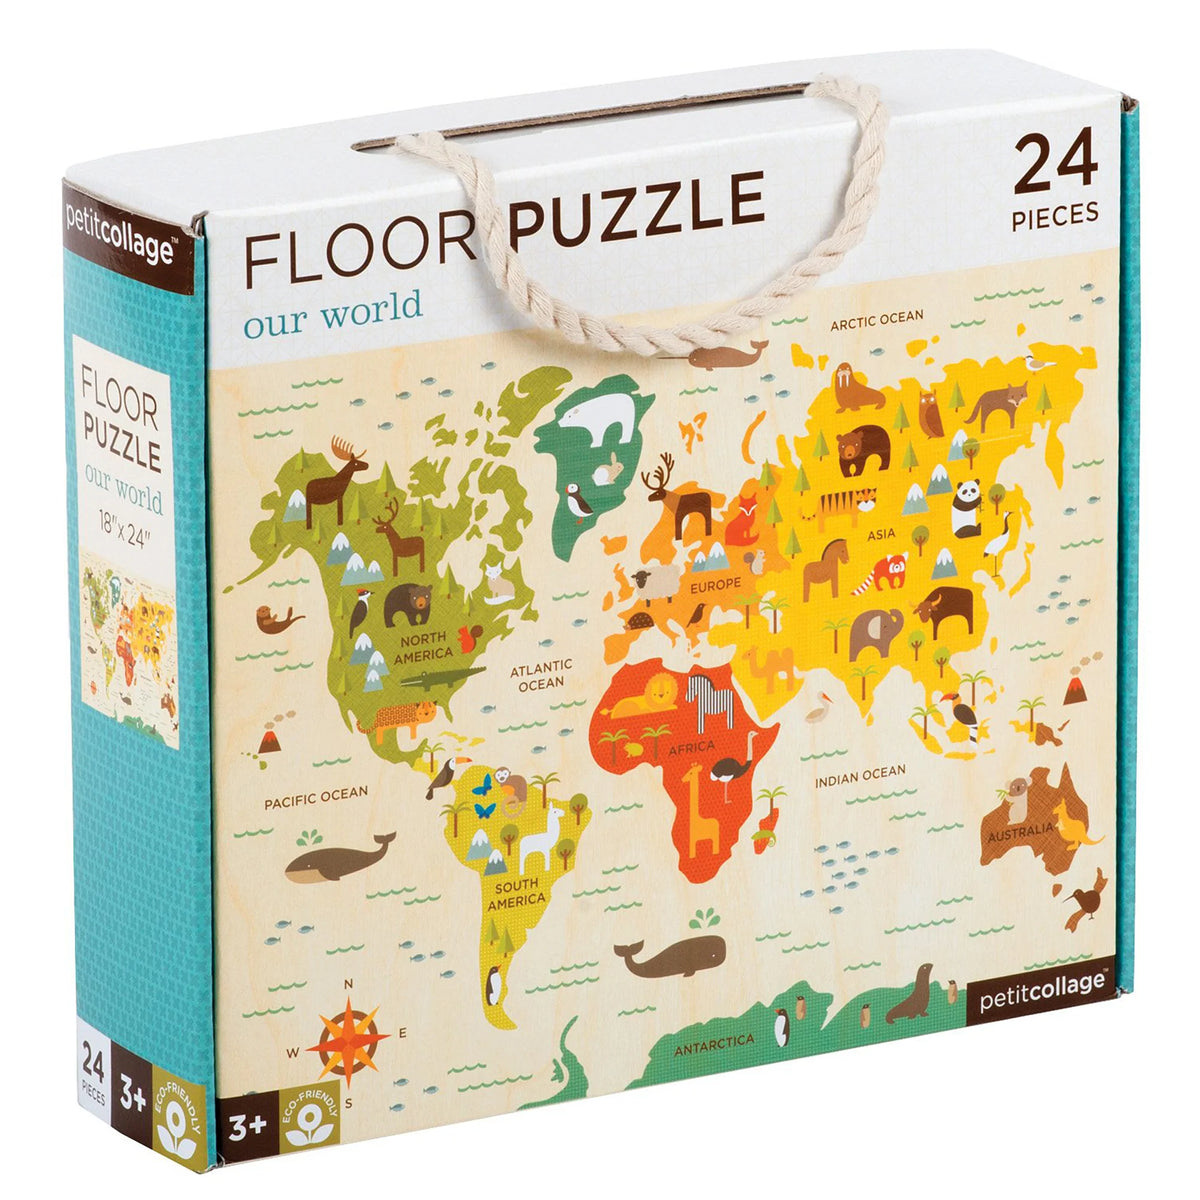 Our World 24-Piece Floor Puzzle